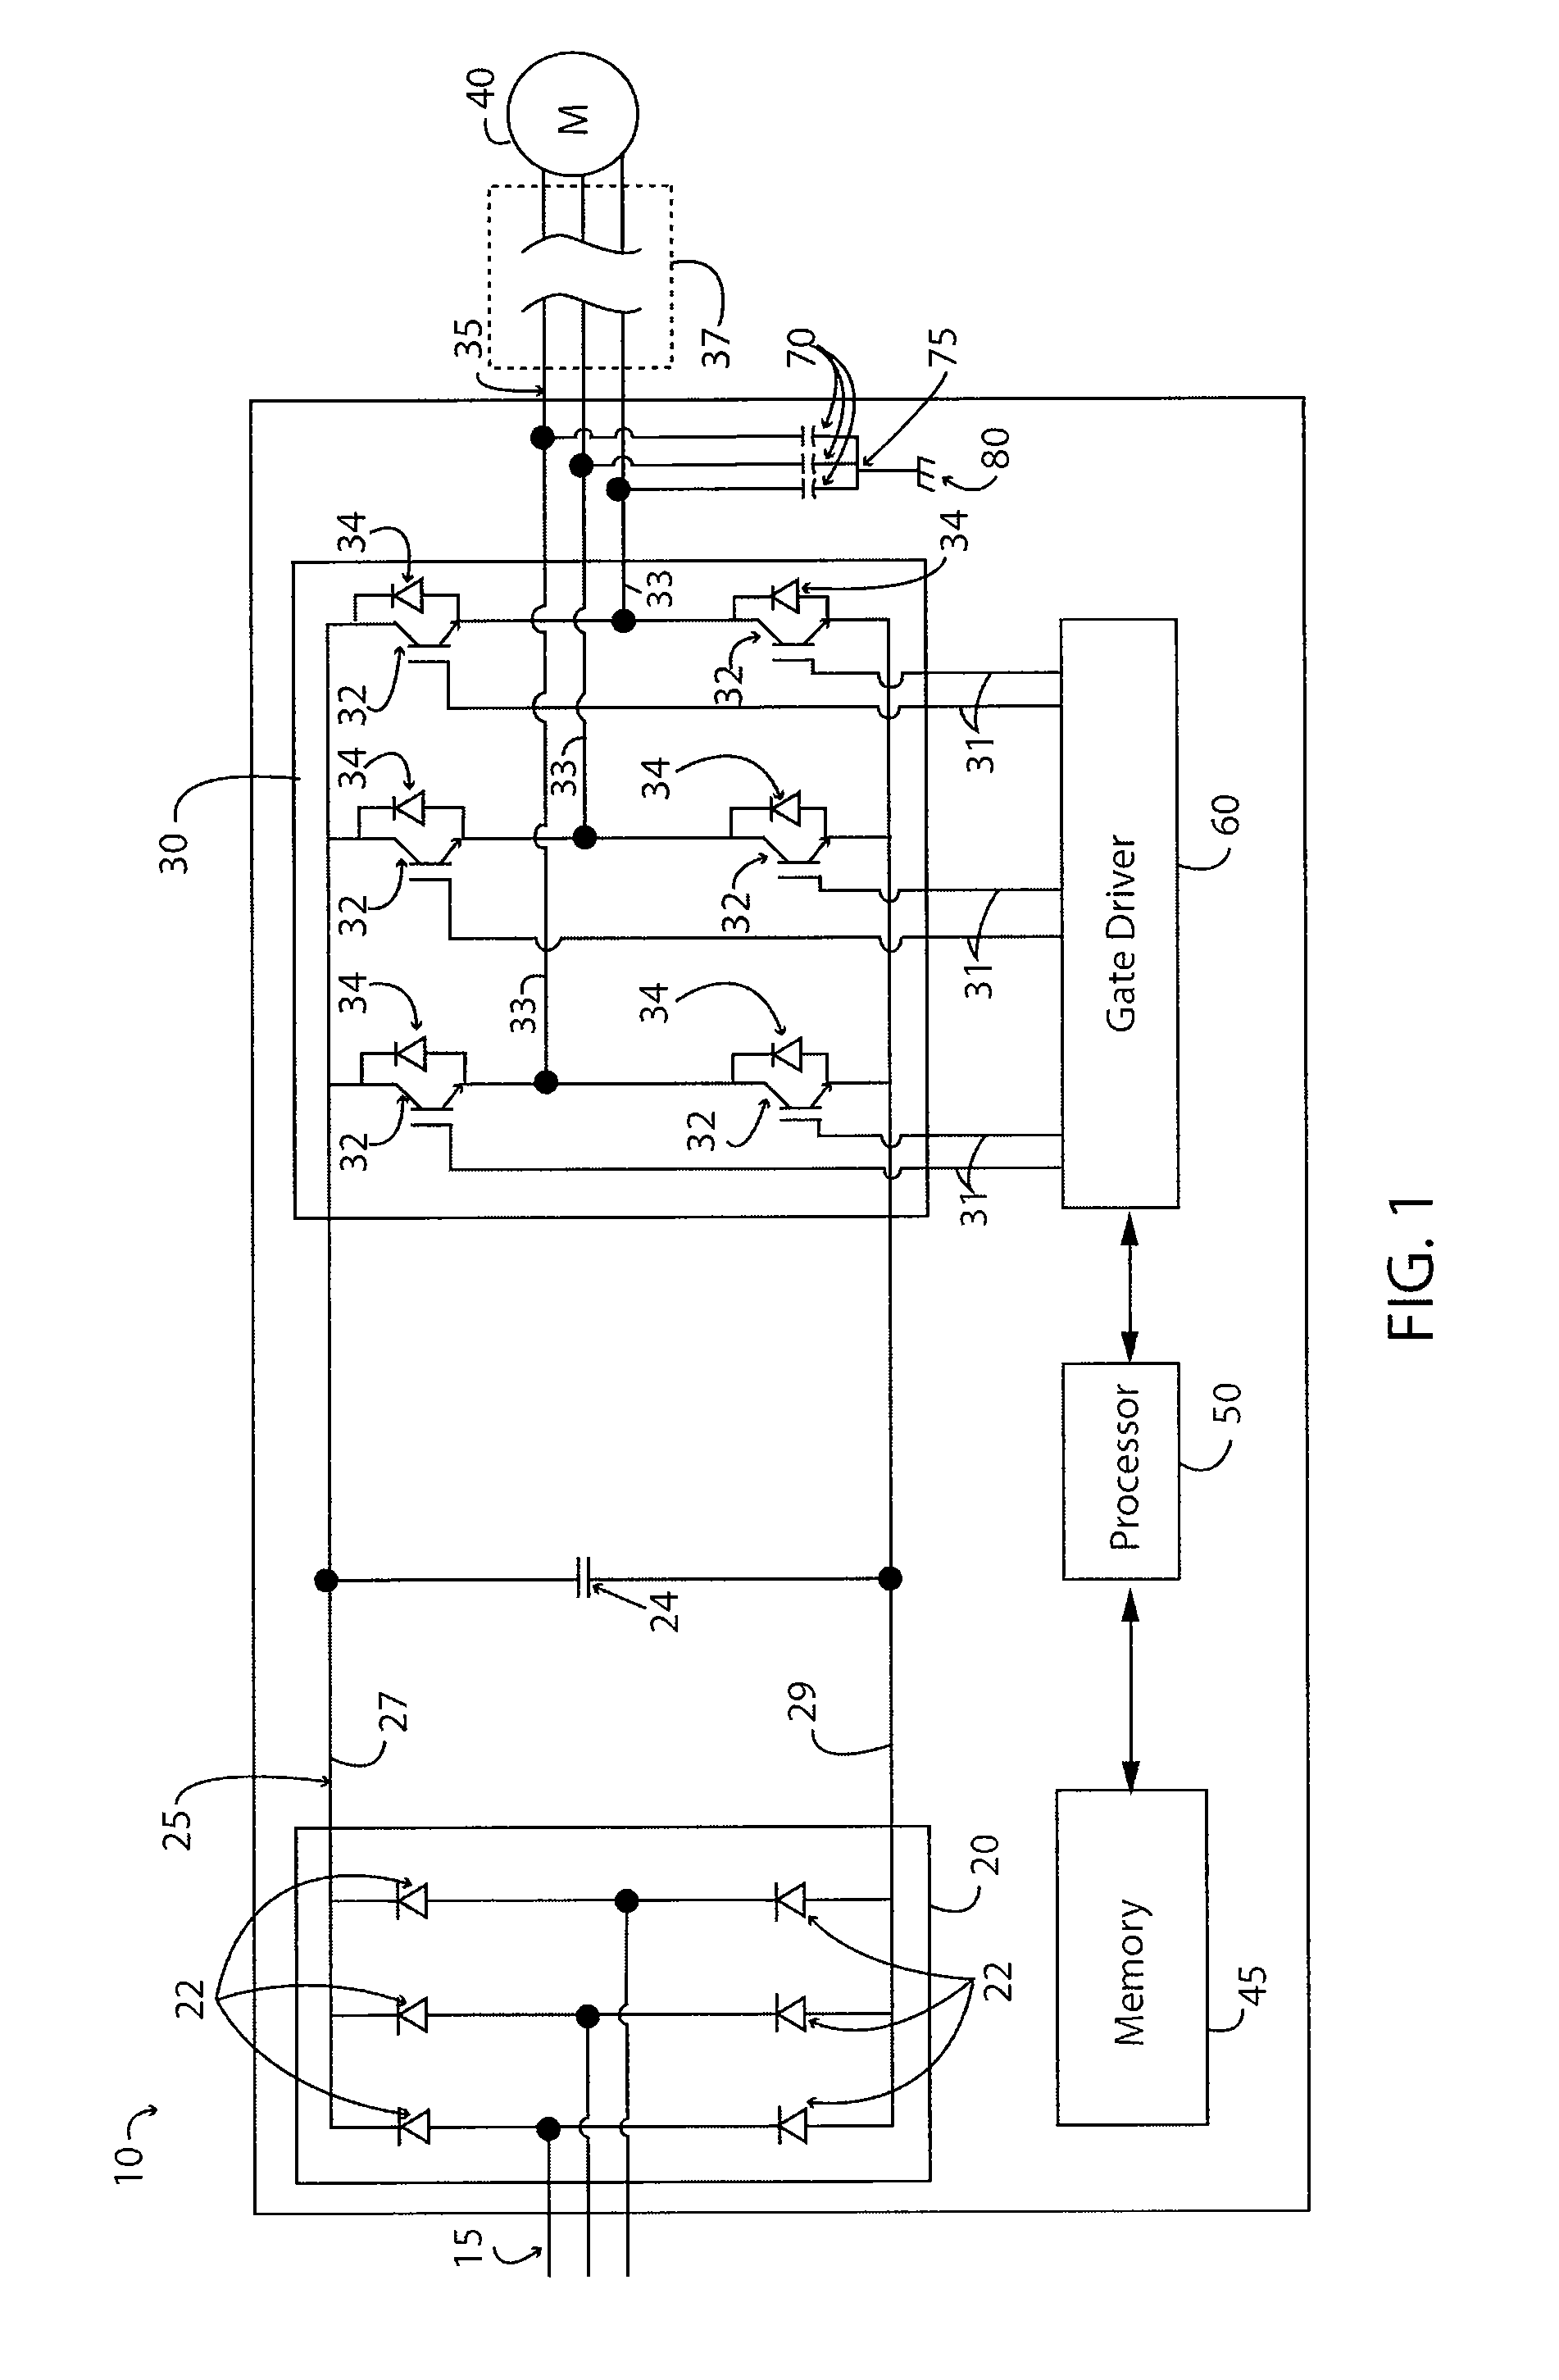 Method and Apparatus for Reducing Radiated Emissions in Switching Power Converters